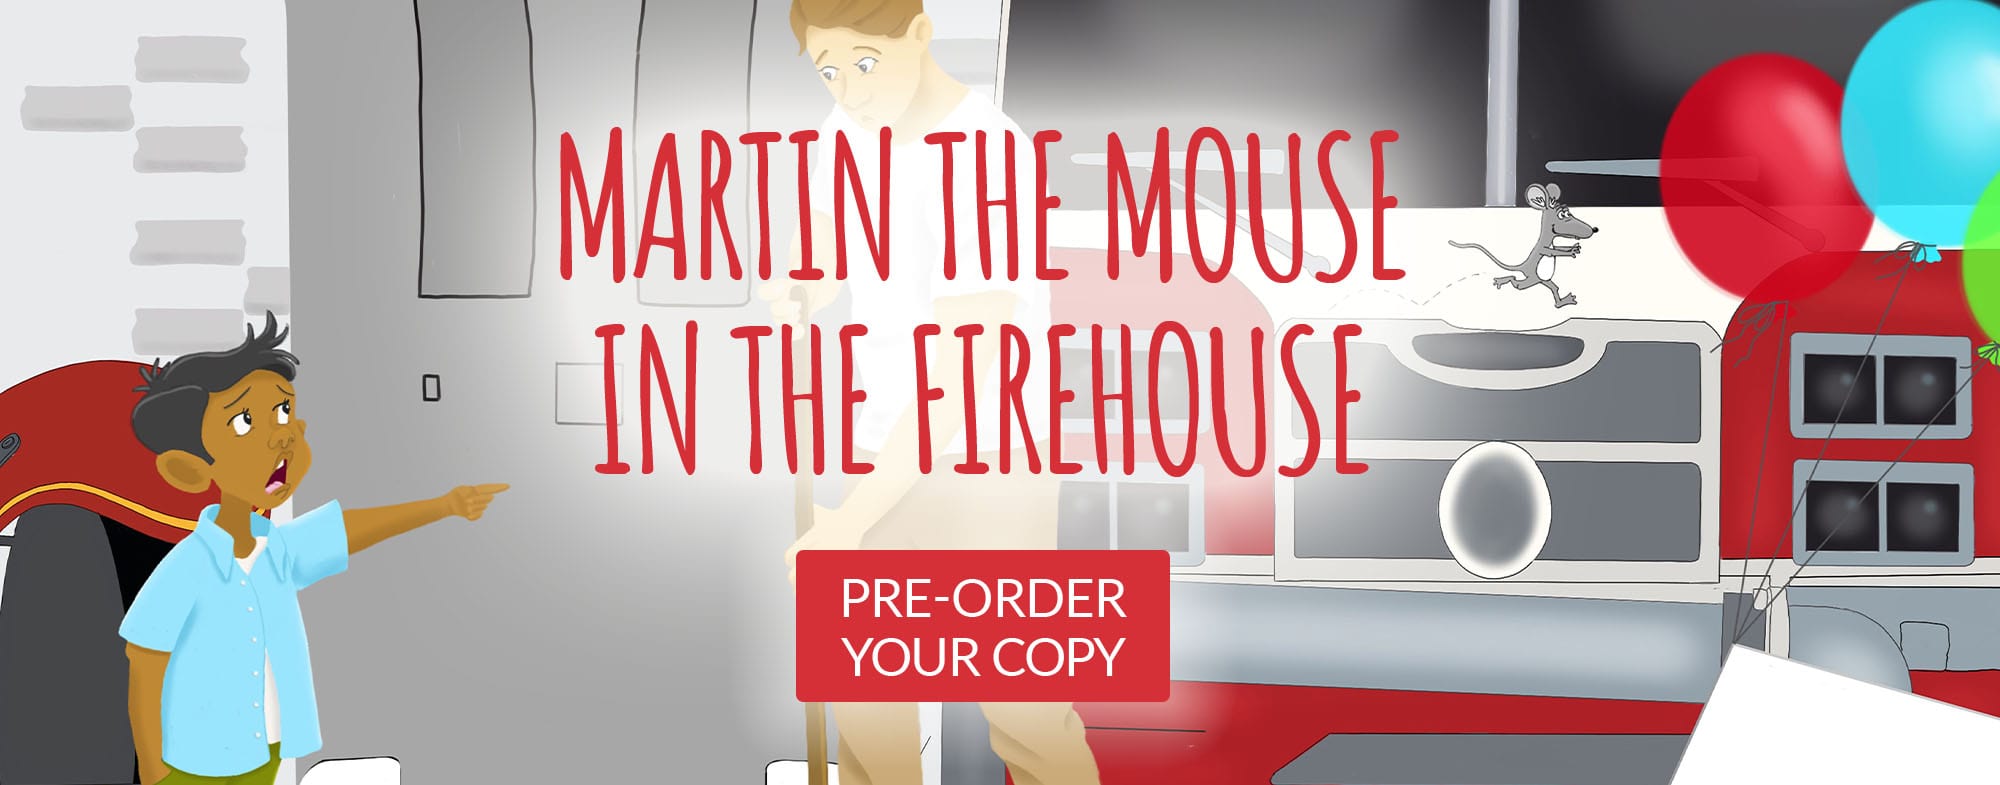 Martin the Mouse in the Firehouse Children's Books for Toddlers and Kids, with Firefighters, Firetrucks, and a mouse on a funny adventure